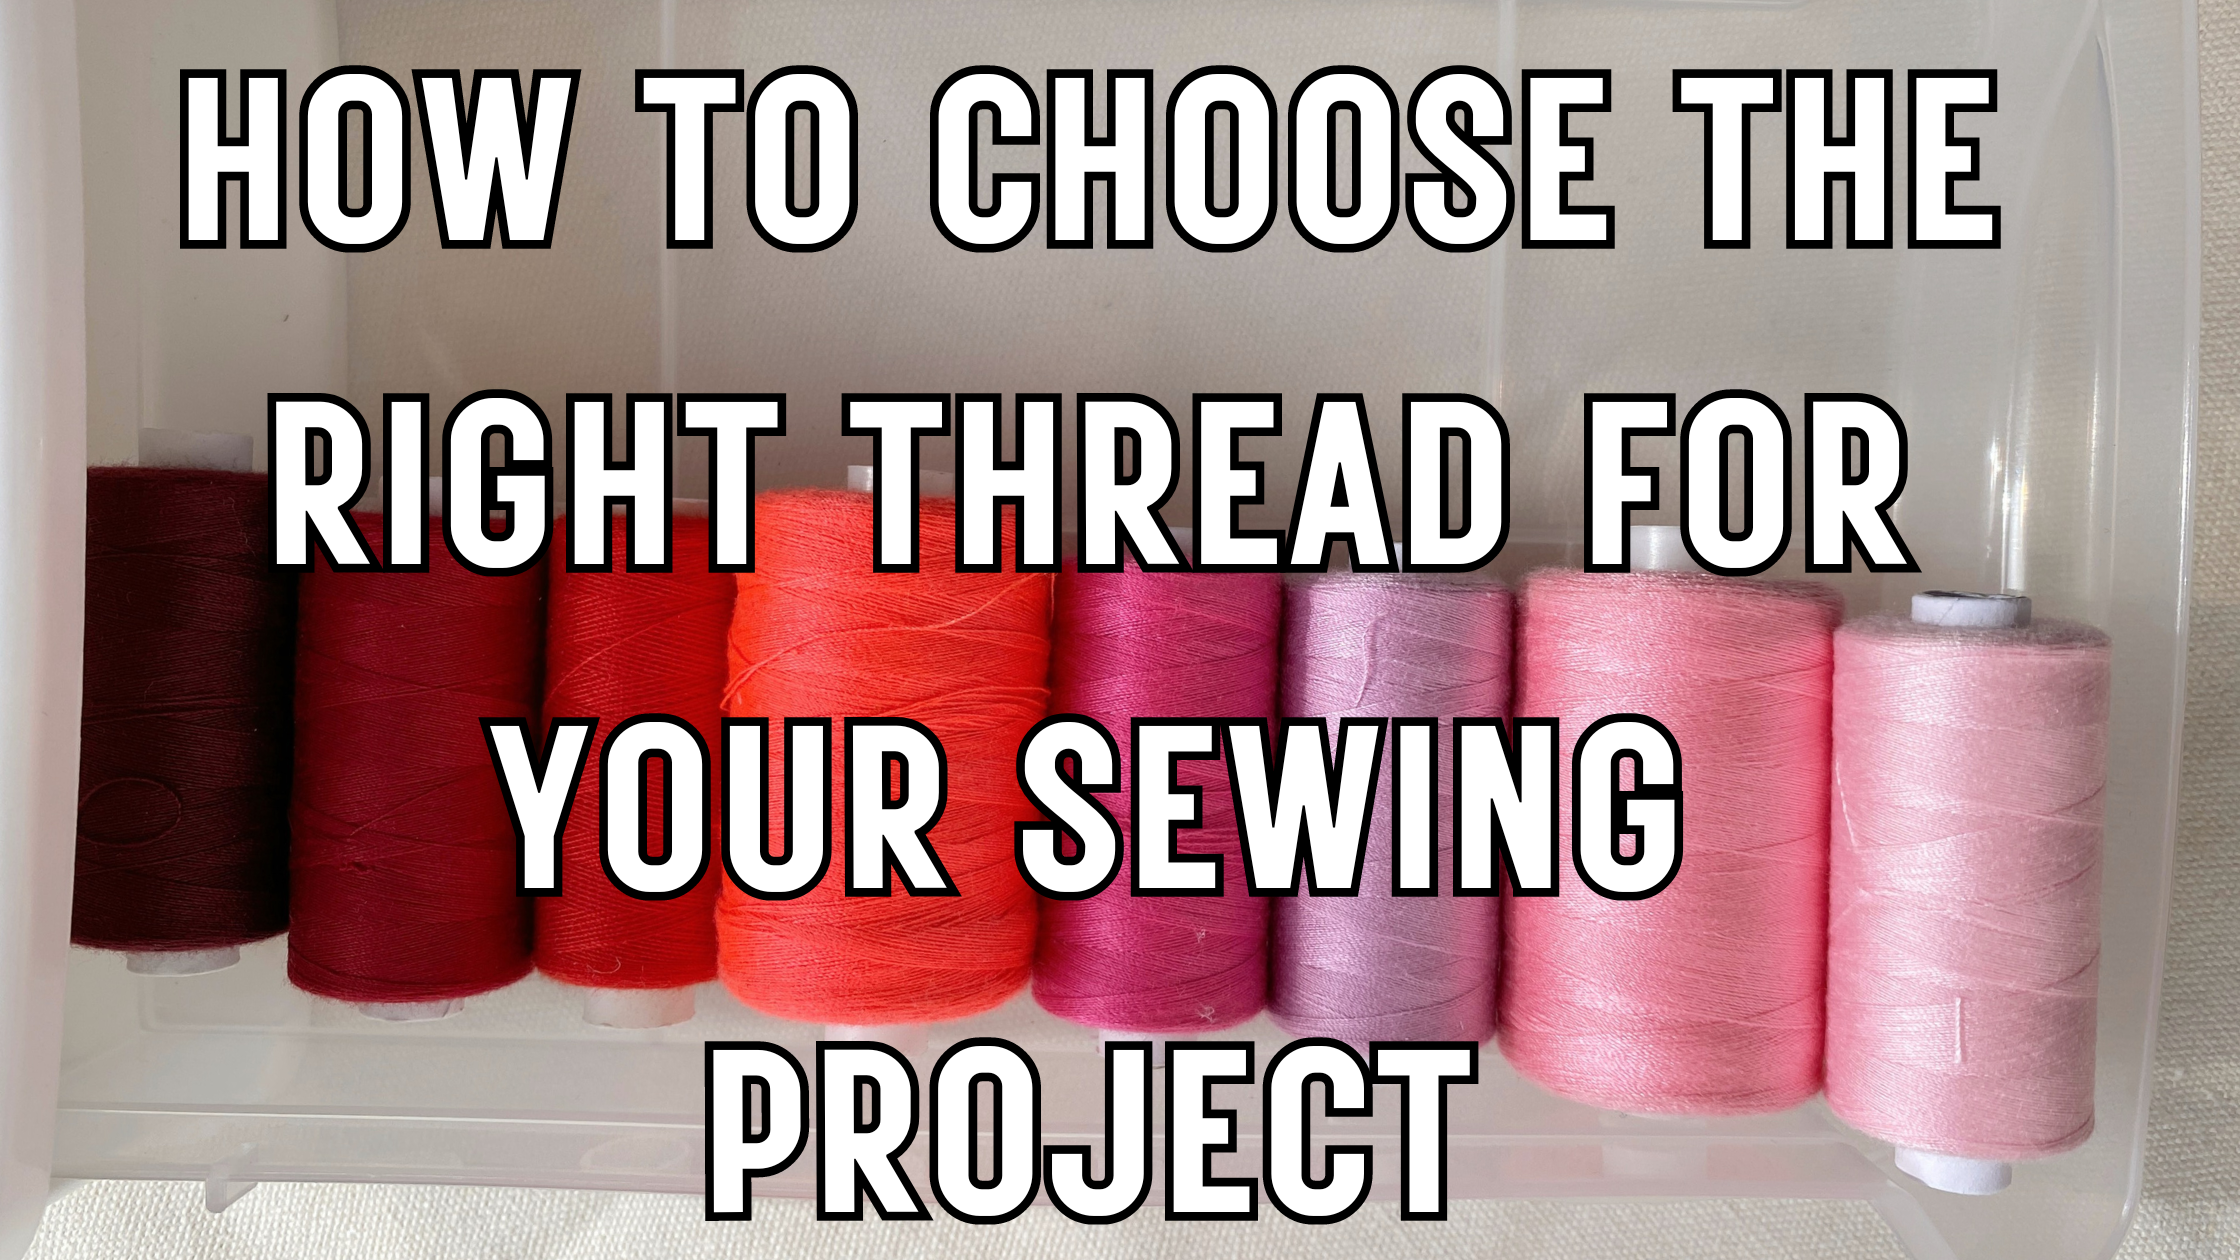 AnielskaAniela: A Blog for Sewing Lovers and DIY Enthusiasts